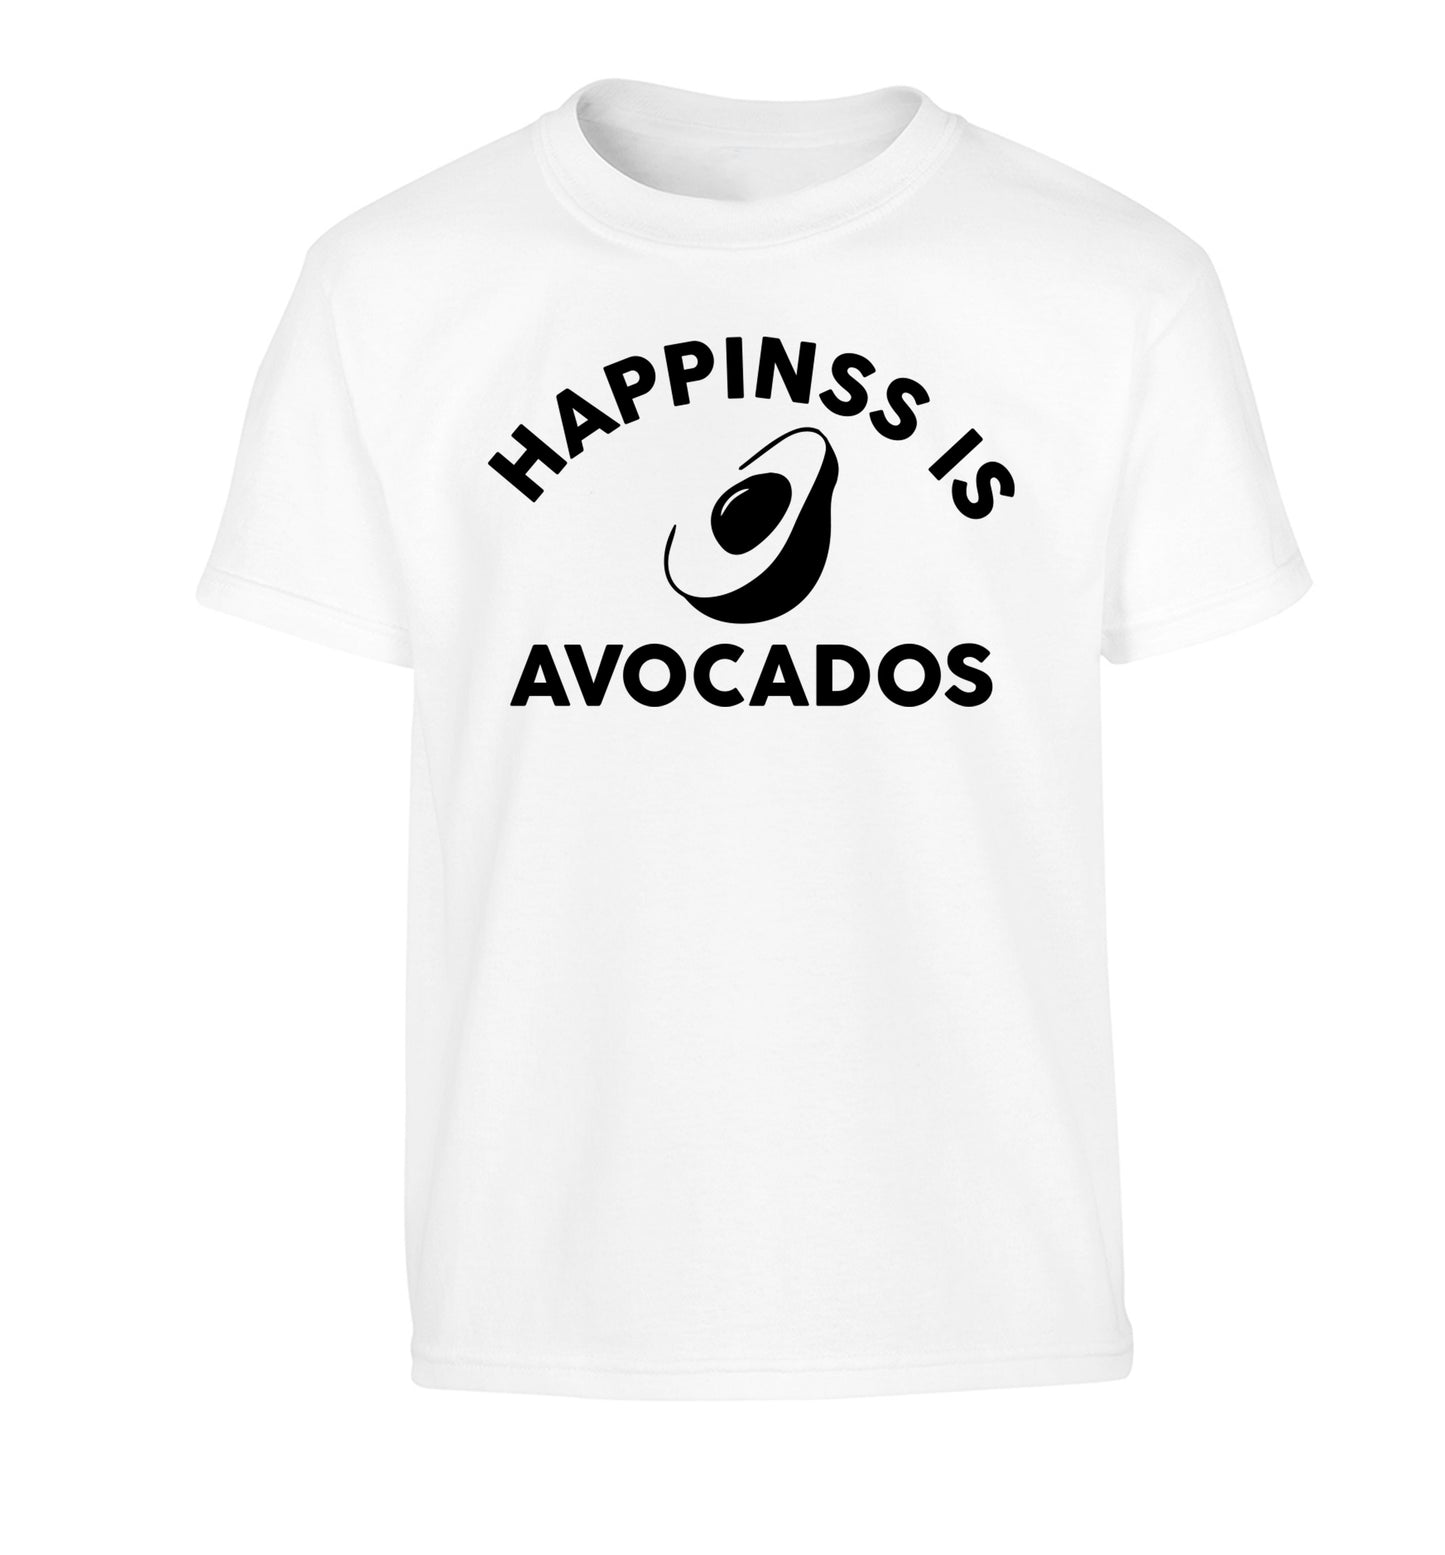 Happiness is avocados Children's white Tshirt 12-14 Years